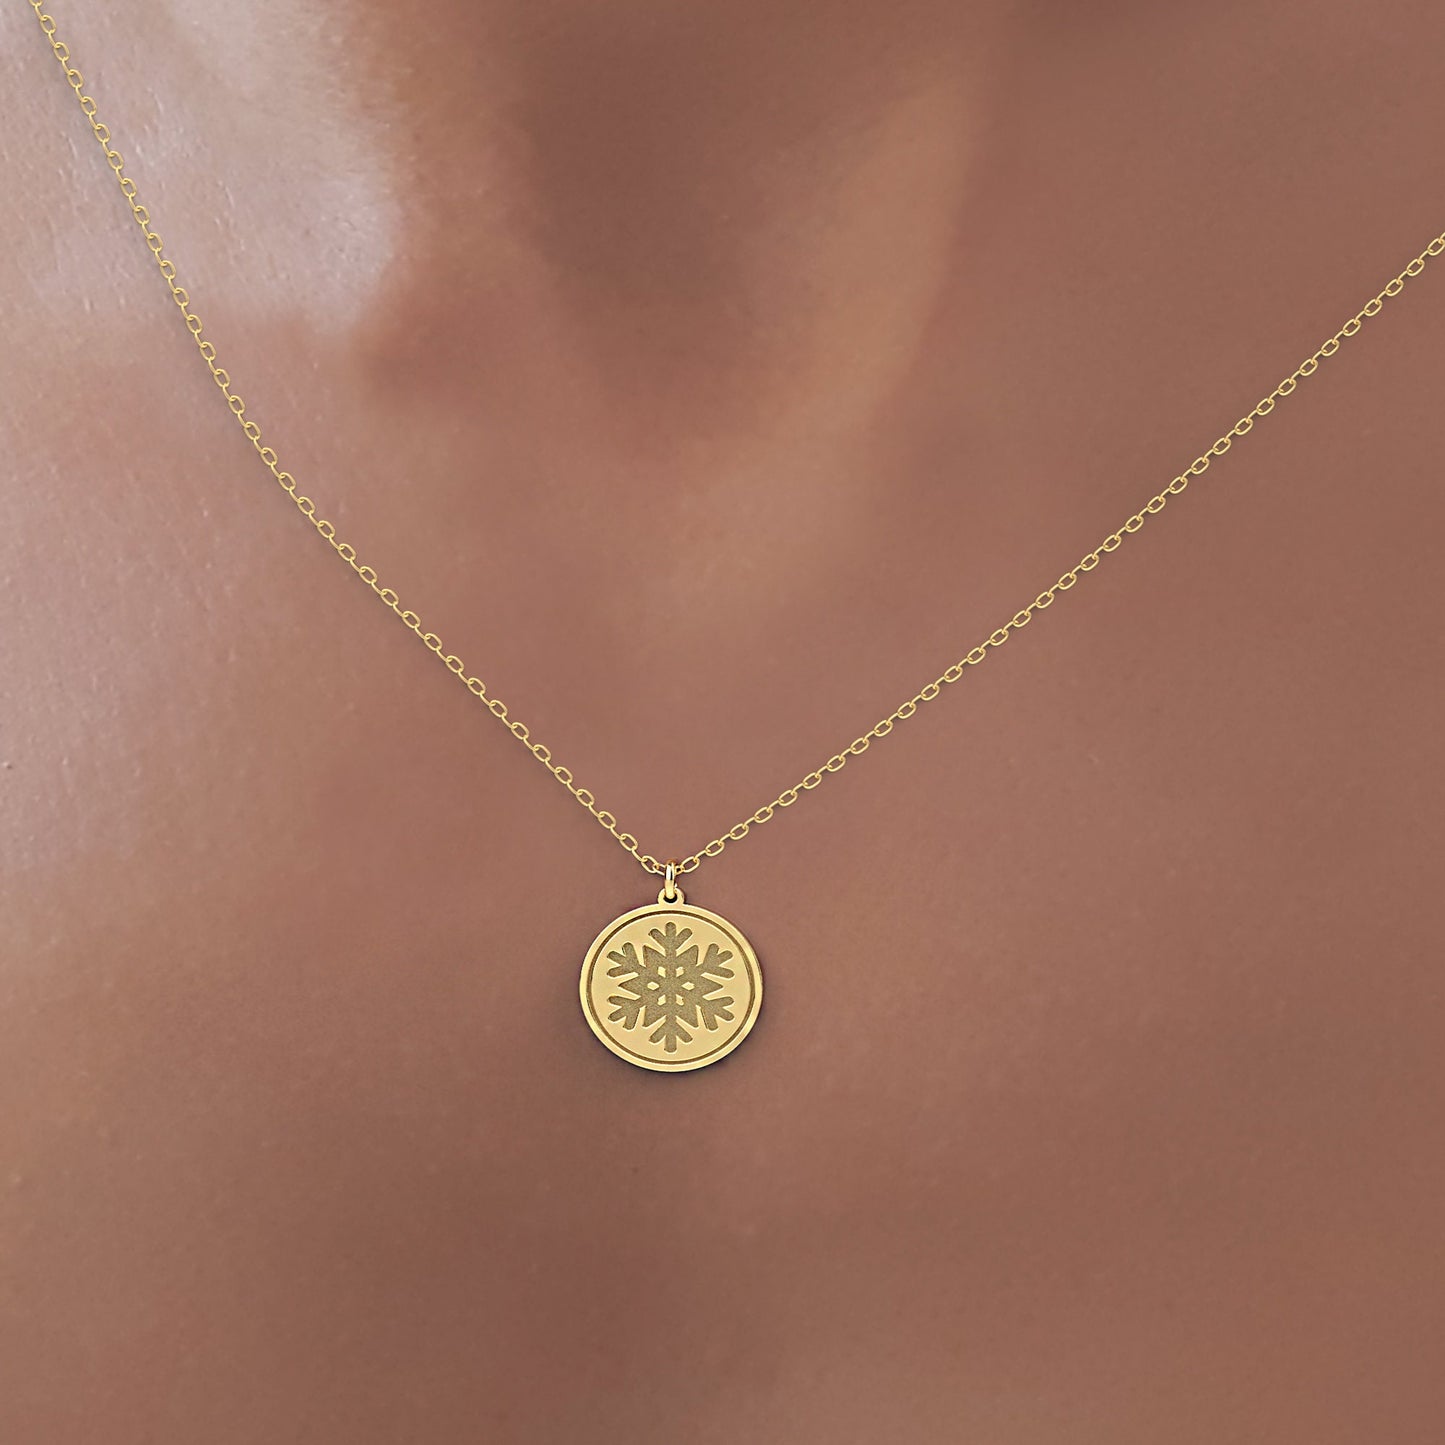 Snowflake Disc Necklace